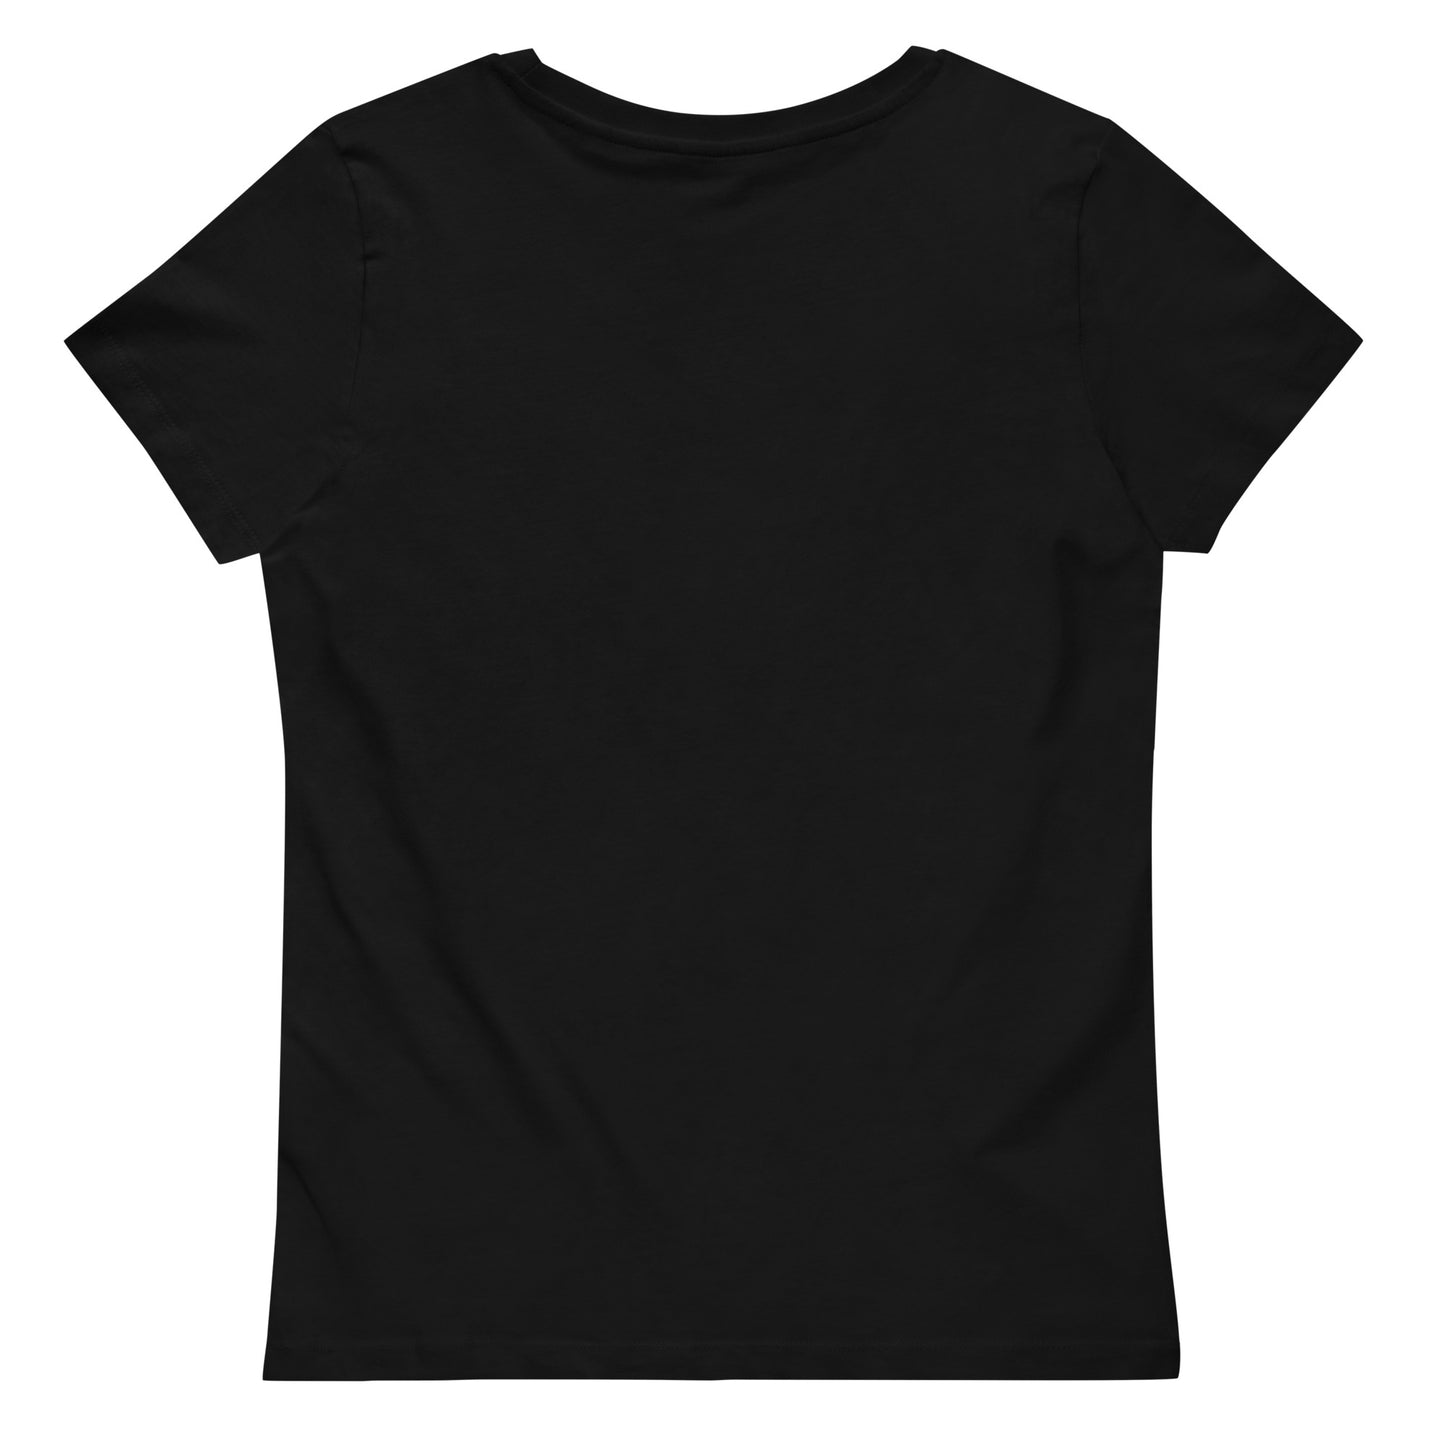 Women's fitted eco tee